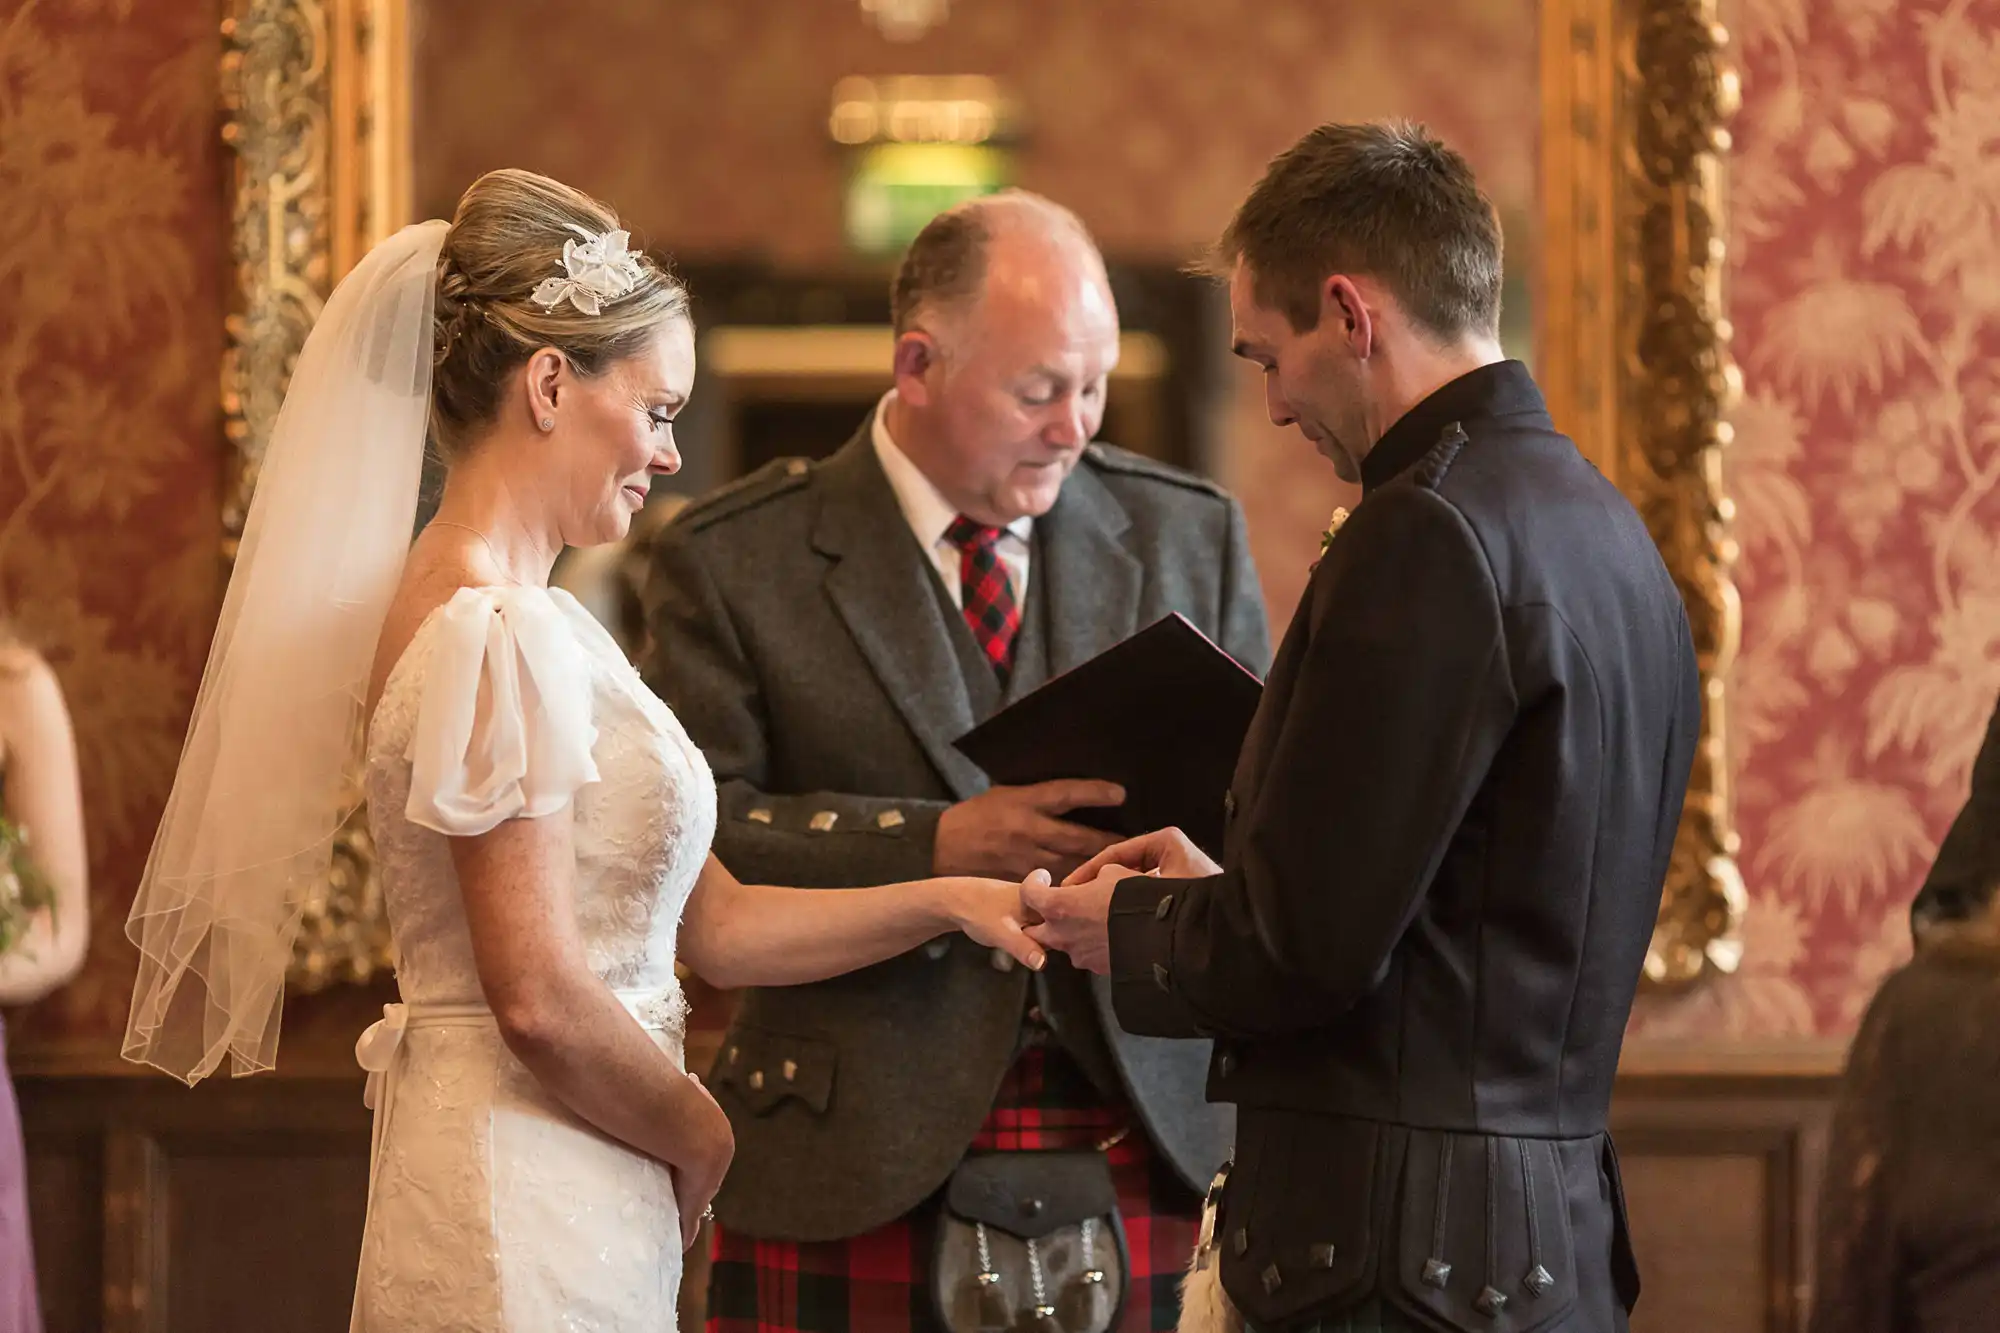 Bride and groom exchange rings during a wedding ceremony, officiated by a man in a kilt, in a richly decorated room.